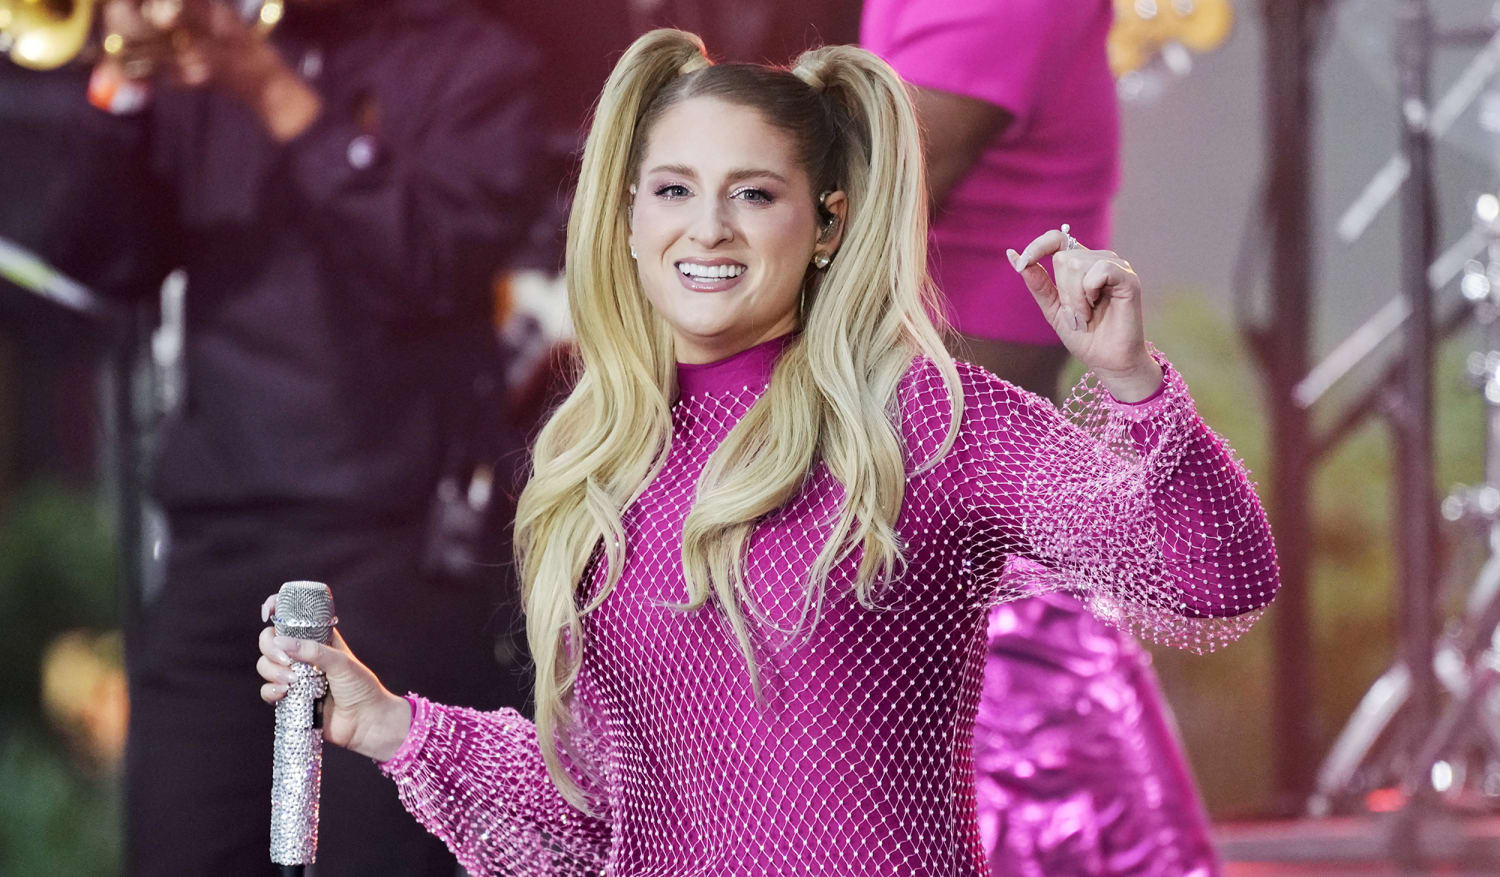 Childbirth is not an aesthetic': Meghan Trainor opens up about